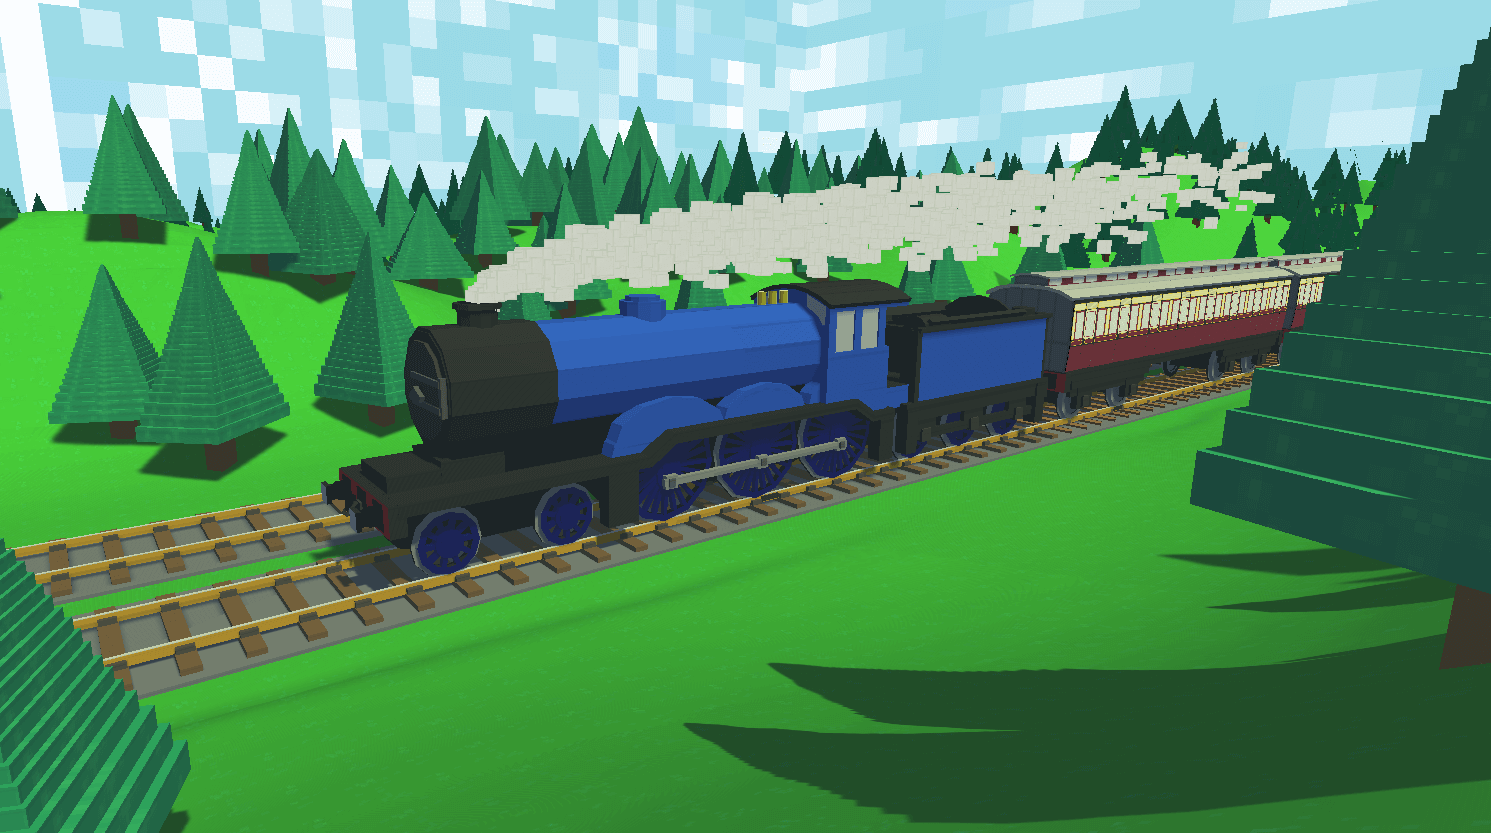 An image of my train game, with the blue train passing the camera while traveling through a valley